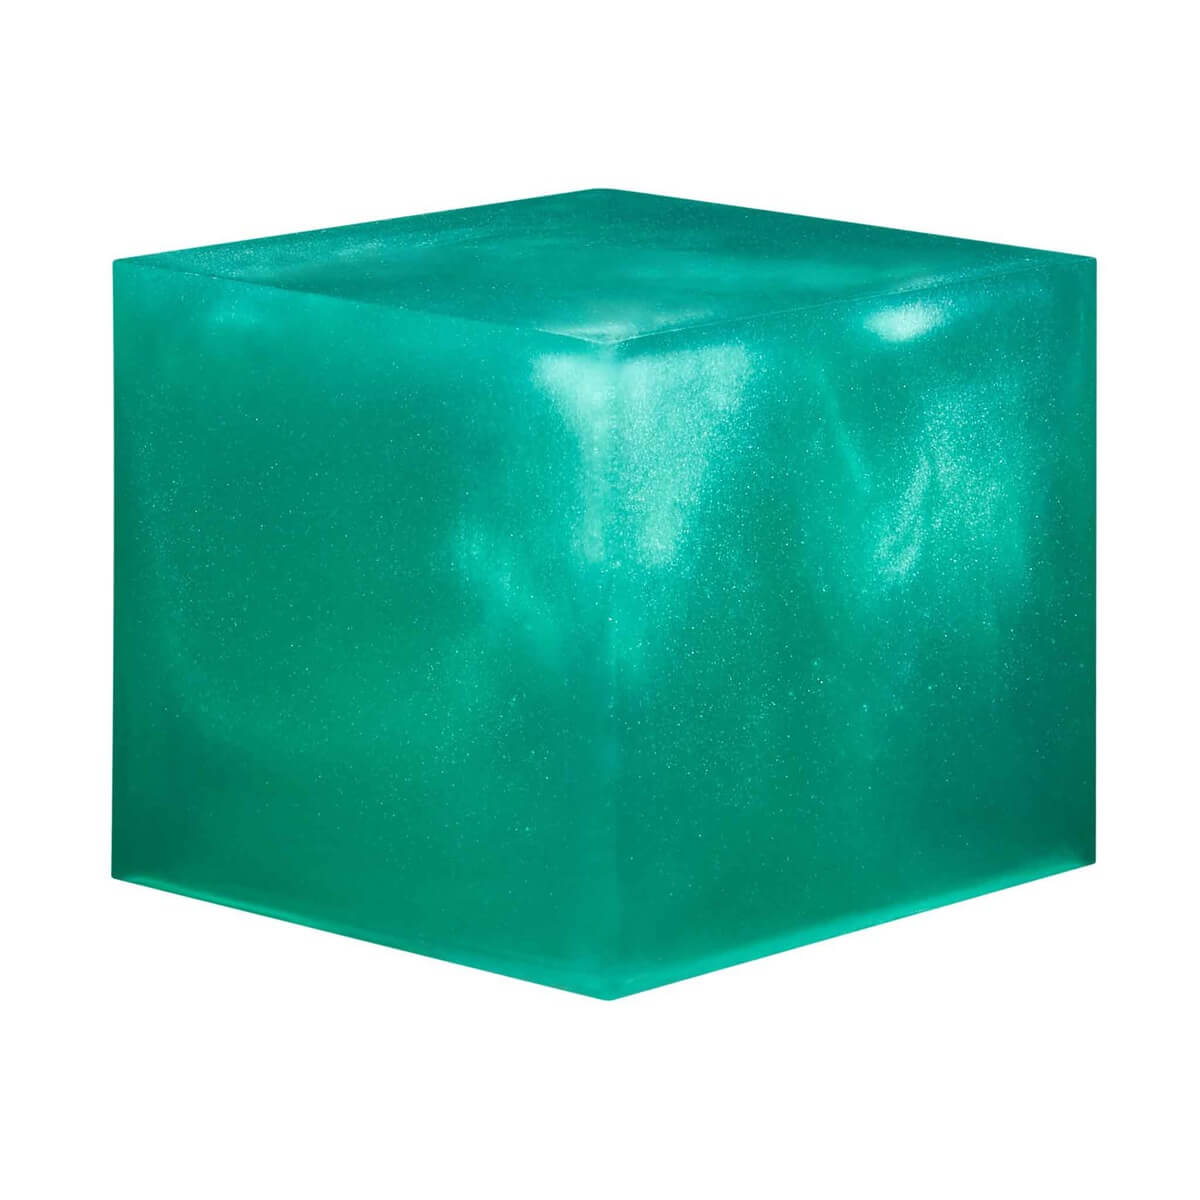 A resin cube made with the River Table Turquoise Mica Powder Pigment by Pigmently.